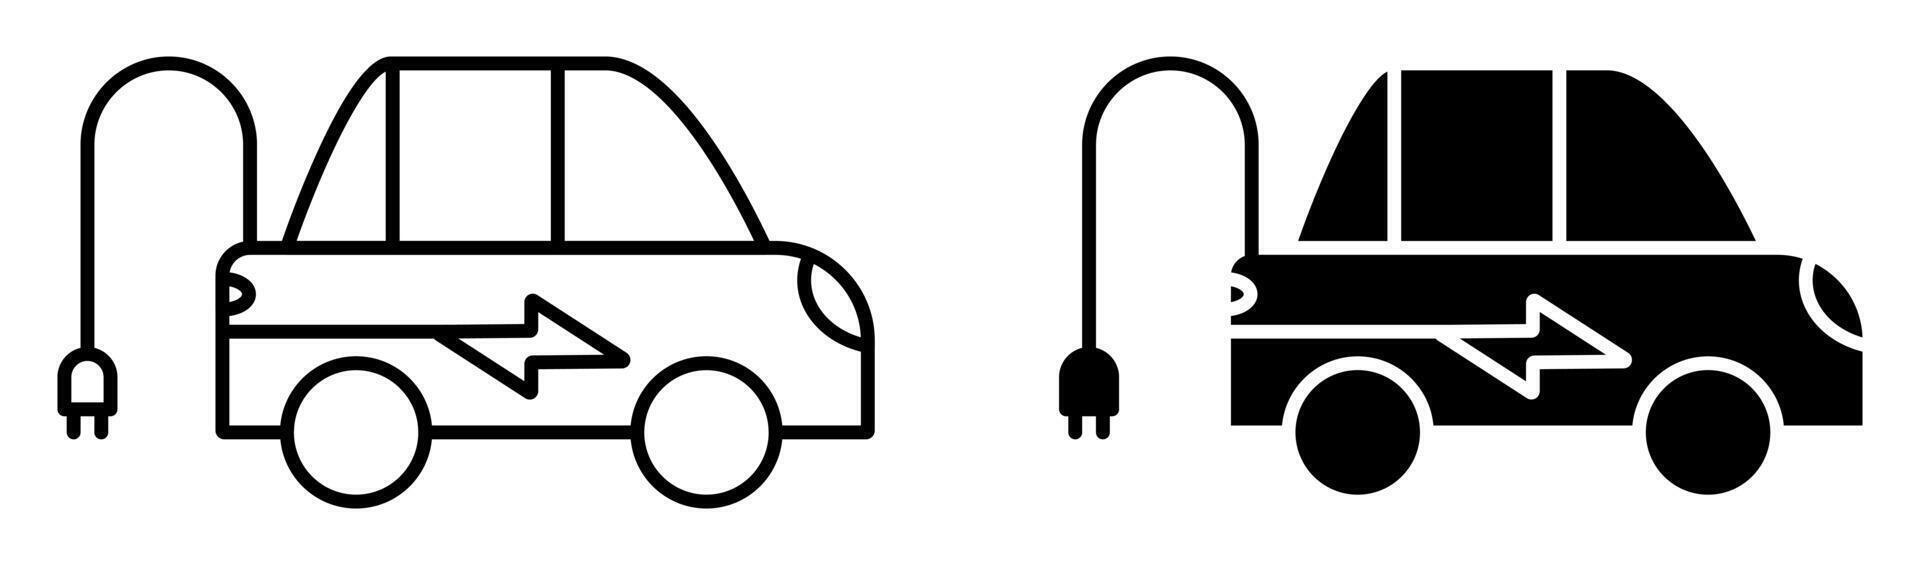 Electric Car Icon. Vector Lines and Silhouettes Isolated on White Background. Simple and Modern Design.